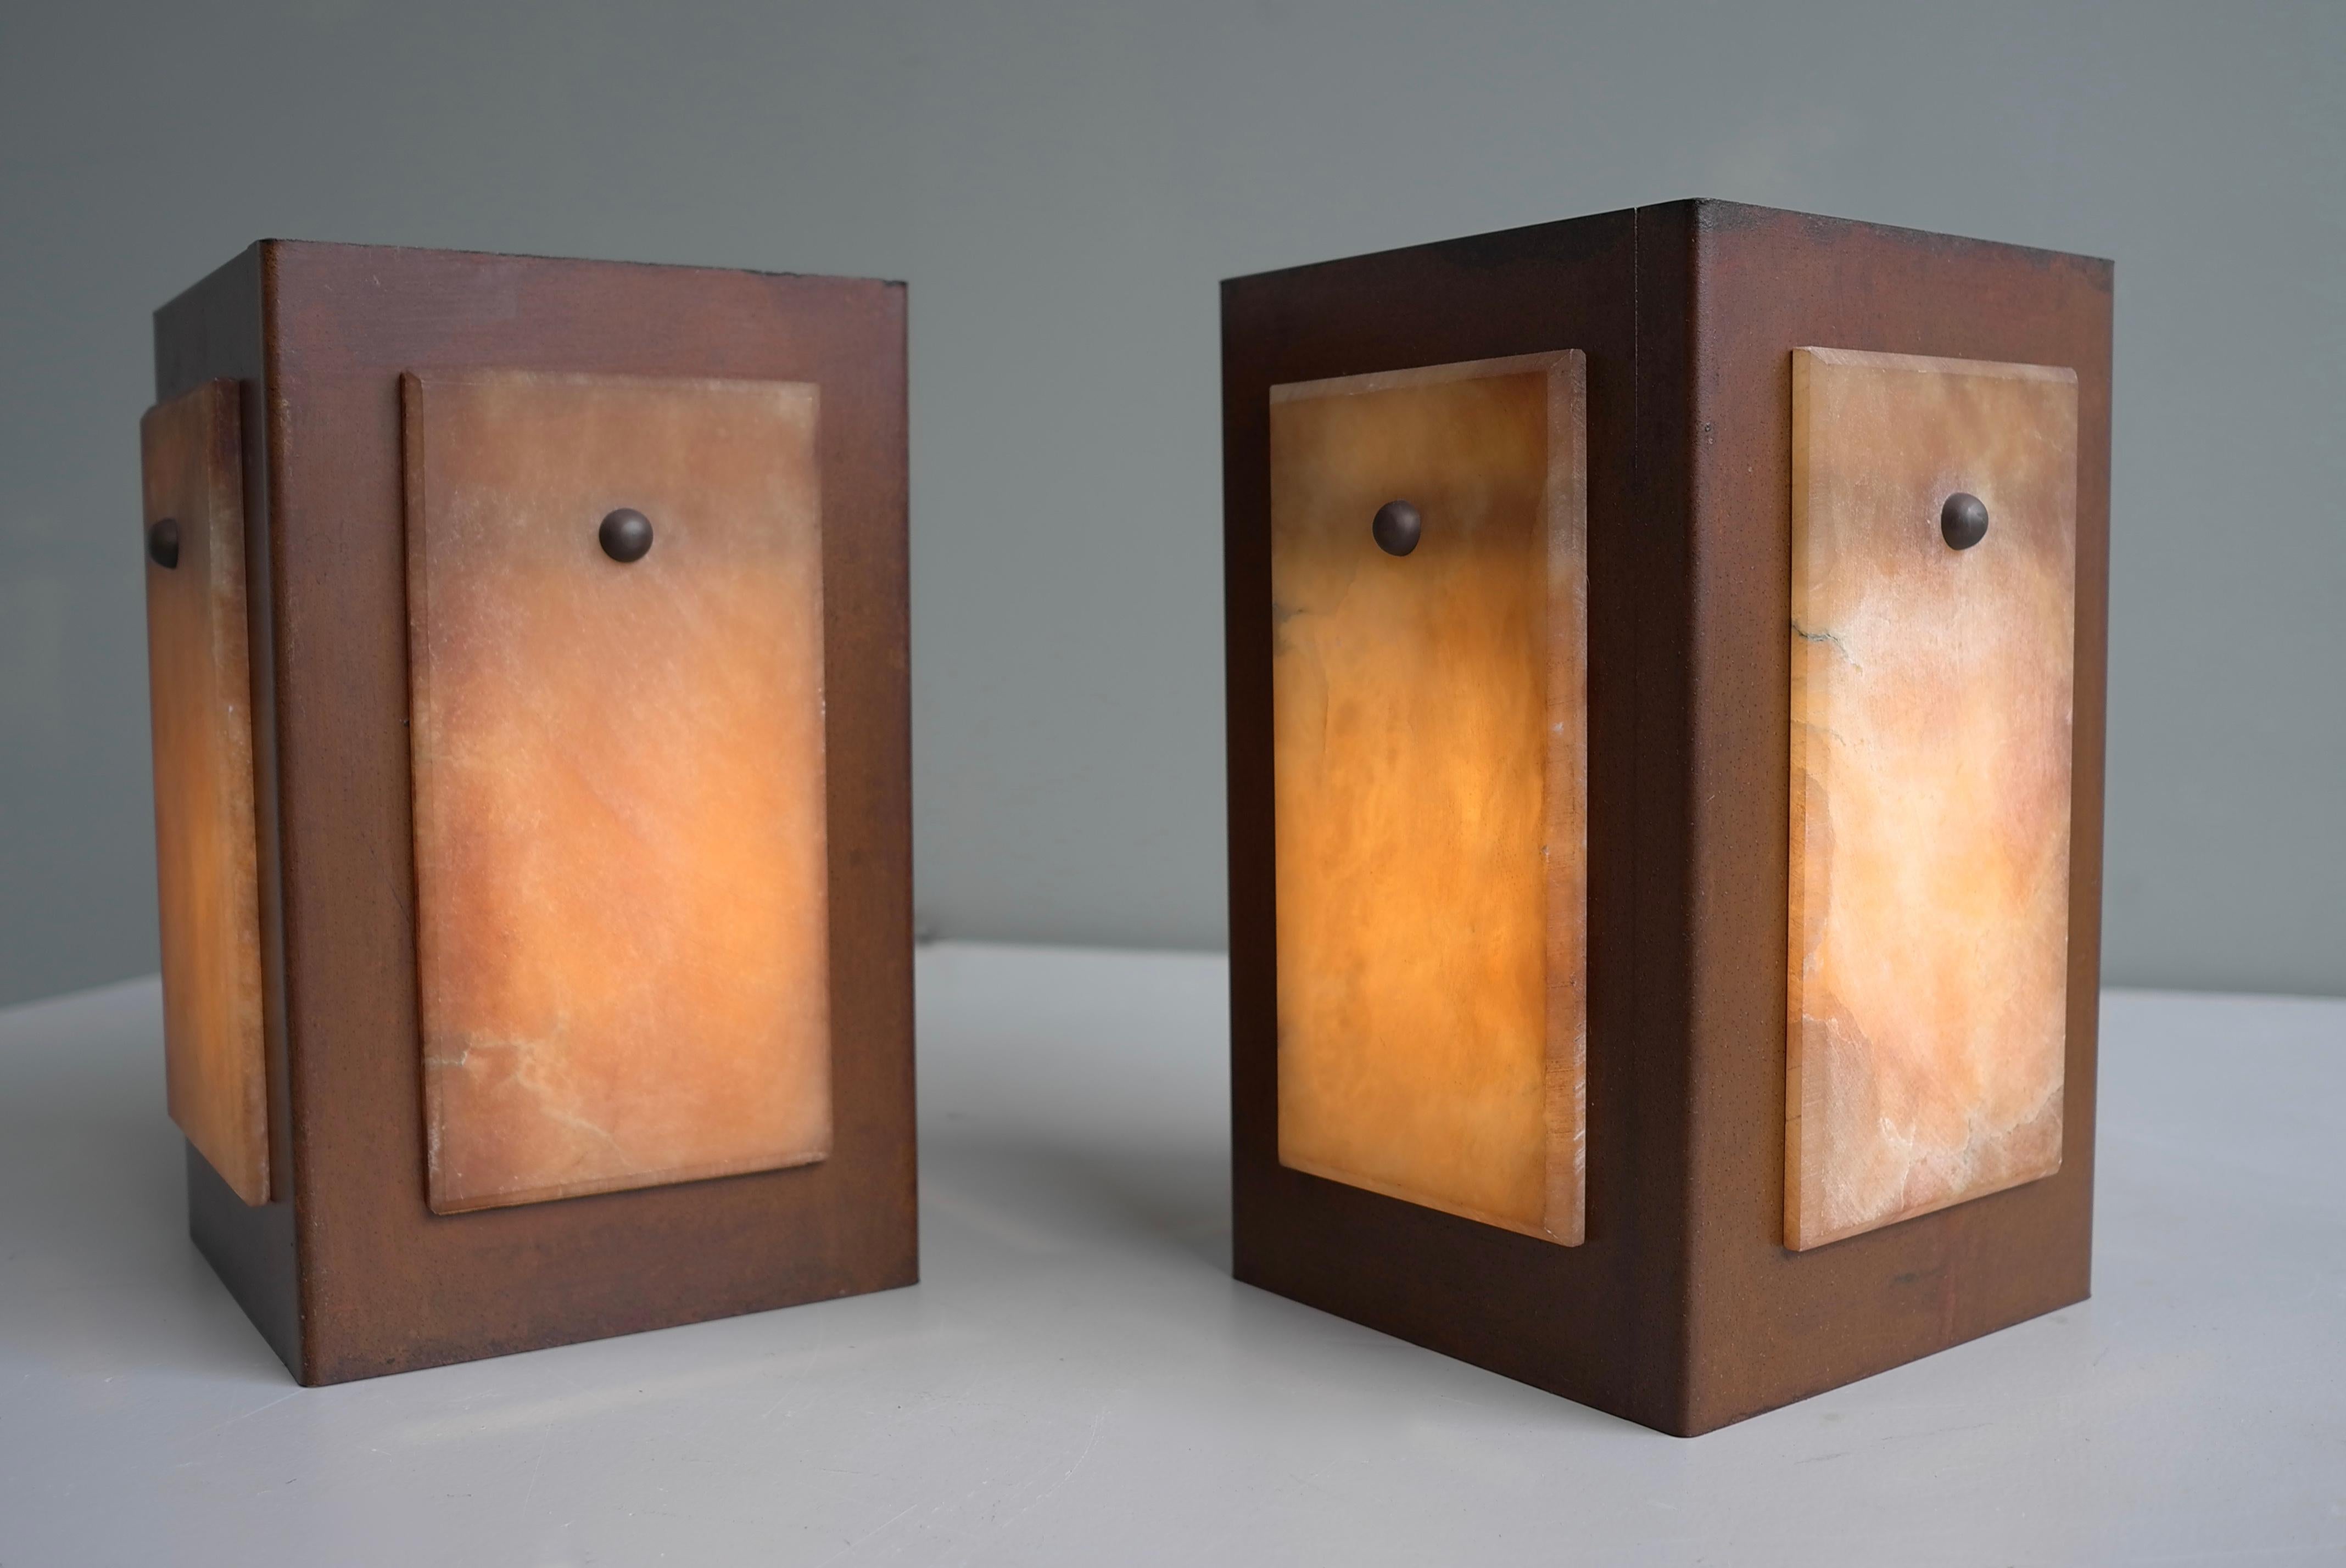 Table Lamps in Alabaster Stone and Rusty Metal, by Pegasam, Spain 1970s For Sale 5